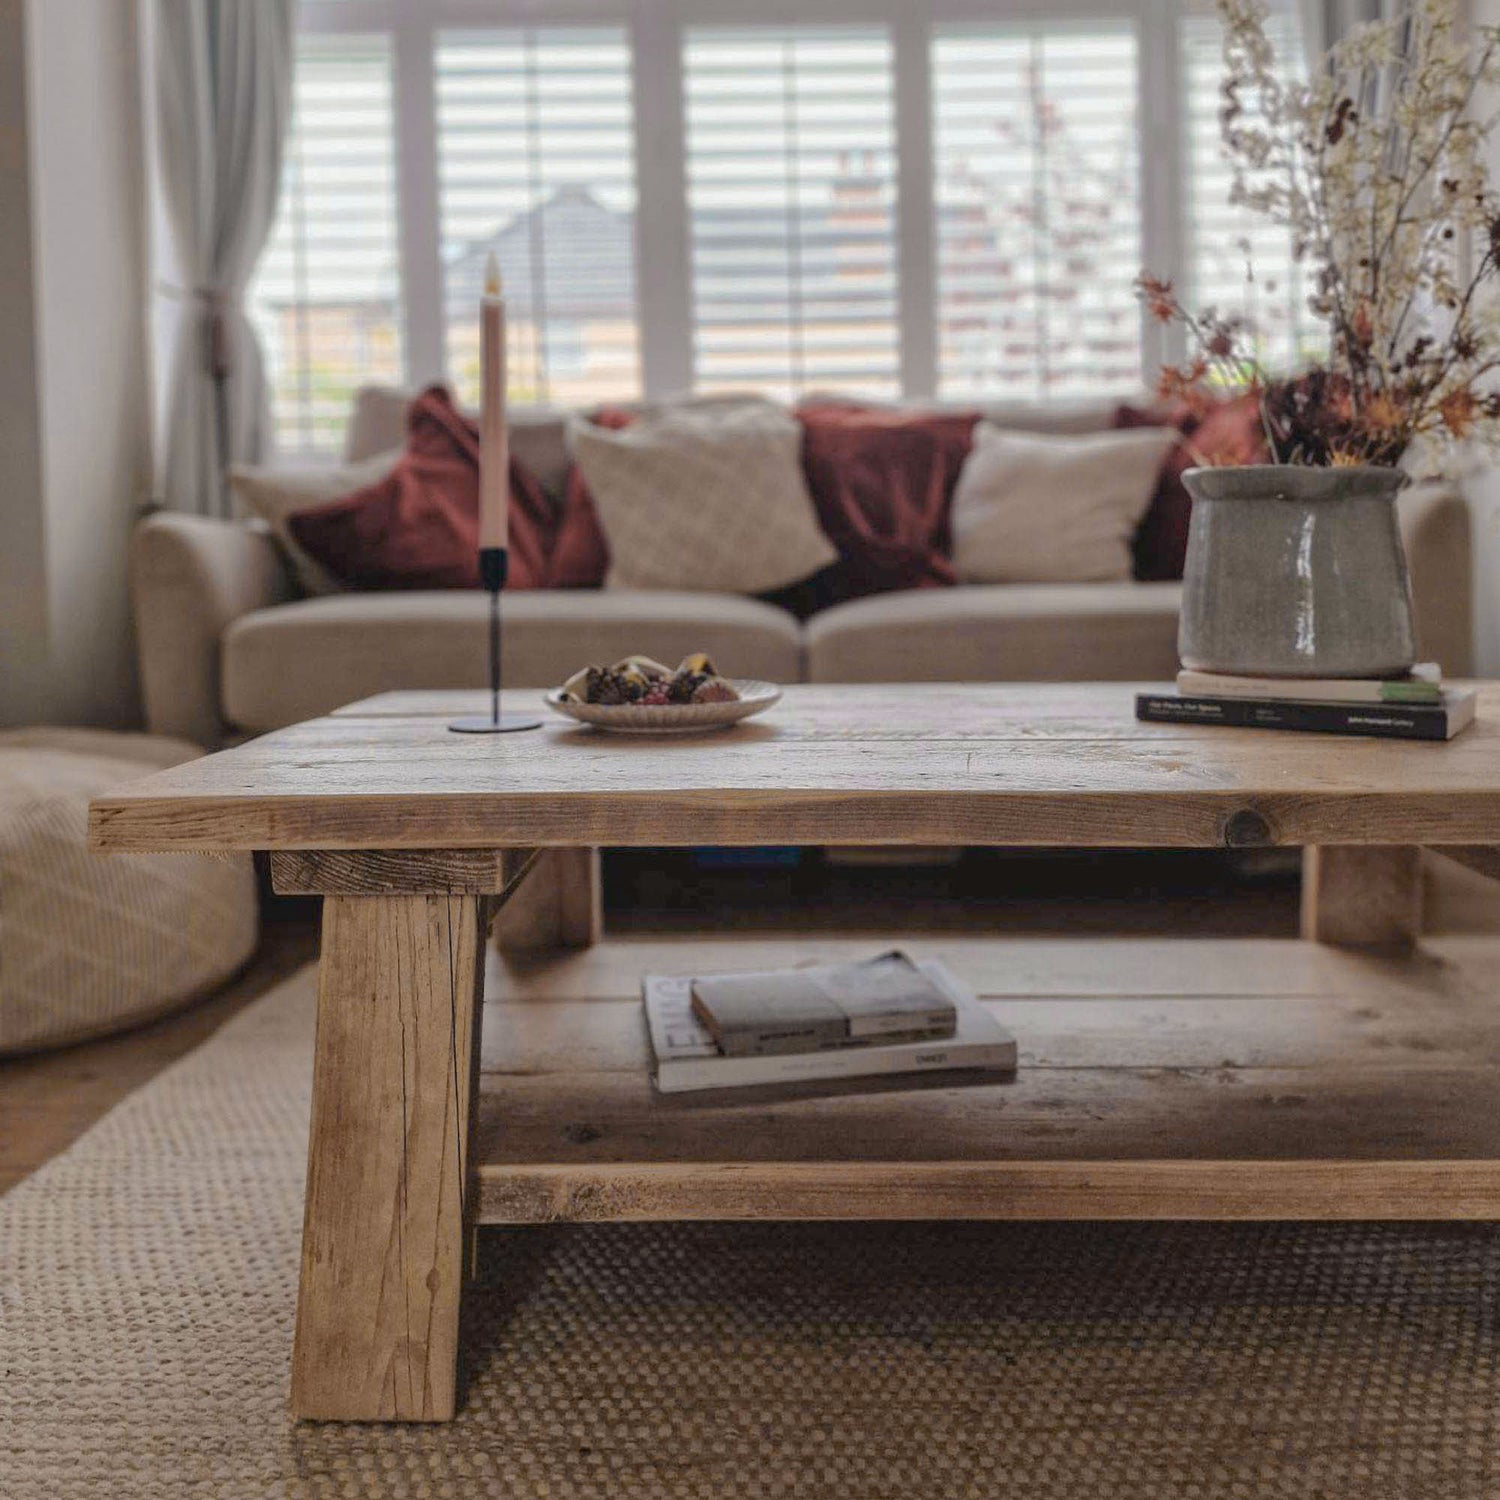 Barn Coffee Table from Still and Bloom